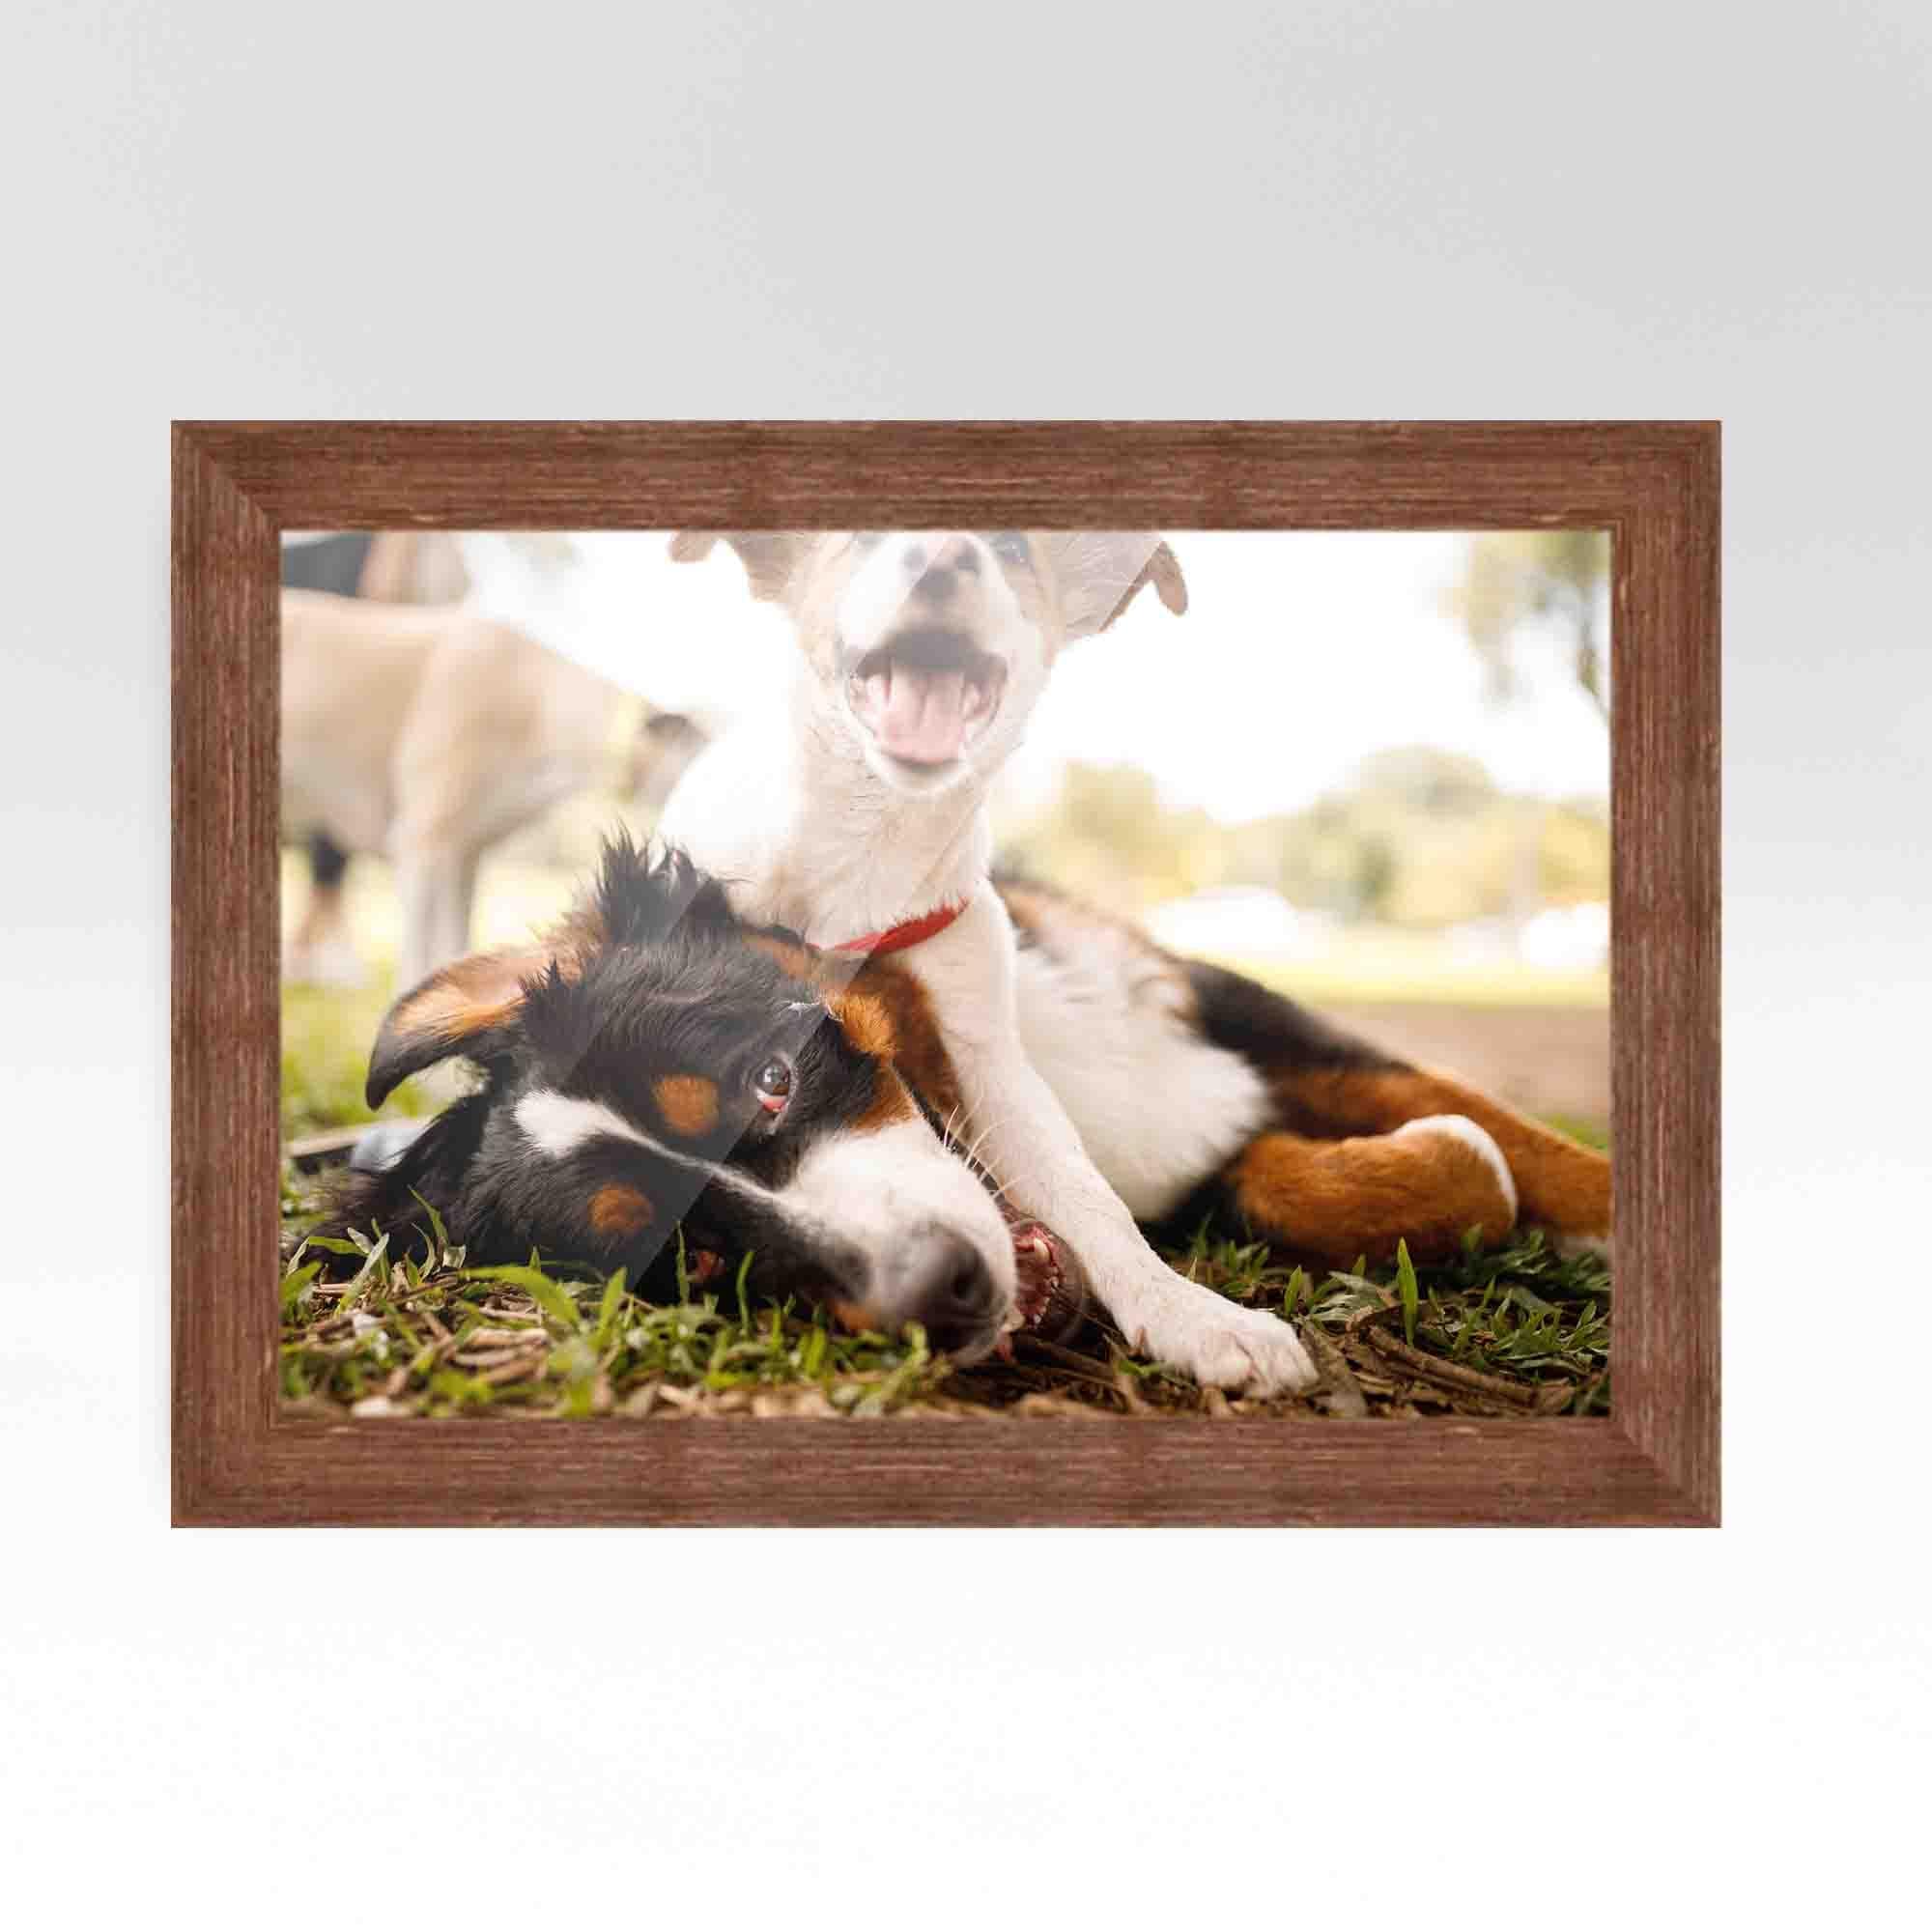 16x24 Picture Frame - Rustic Picture Frame Complete With UV